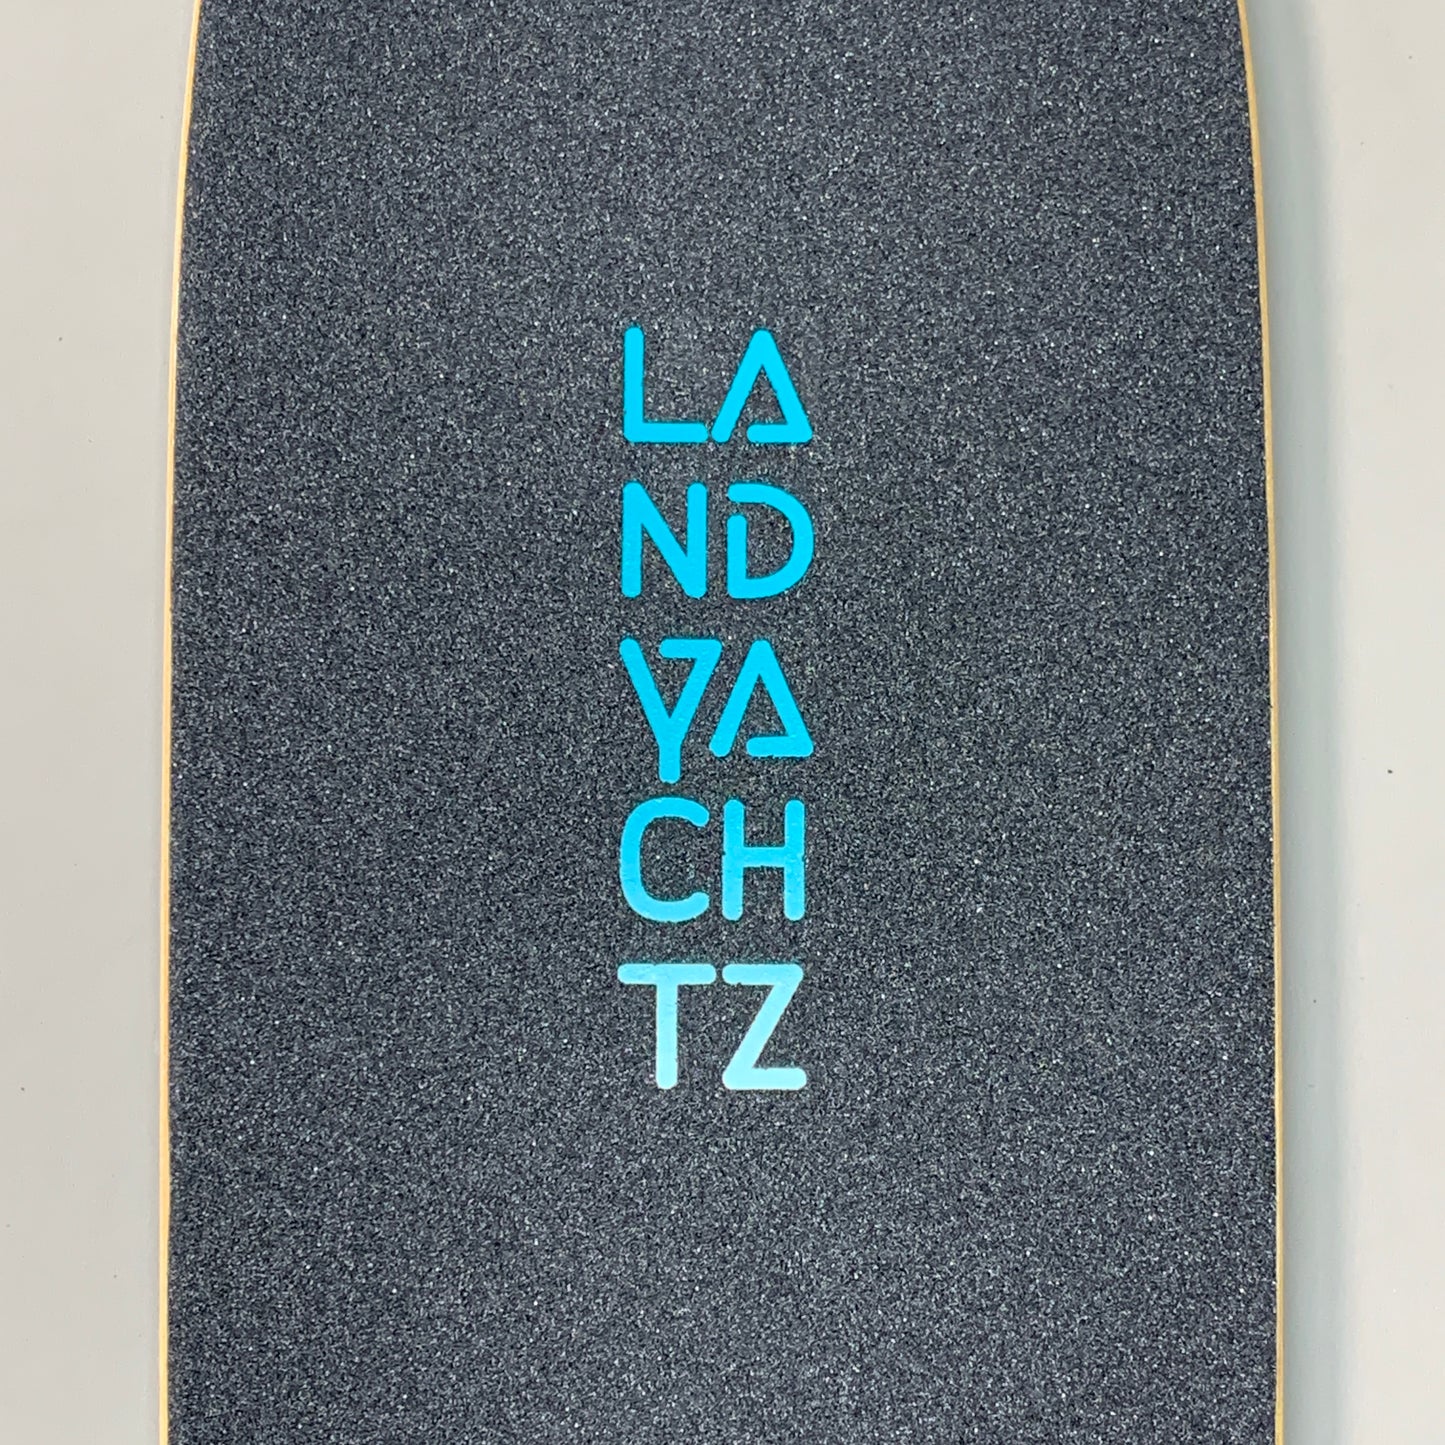 LANDYACHTZ Longboard Dinghy Coffin Kitty Cruiser Kicktail Grip Taped 28.5"x8" (New Other)